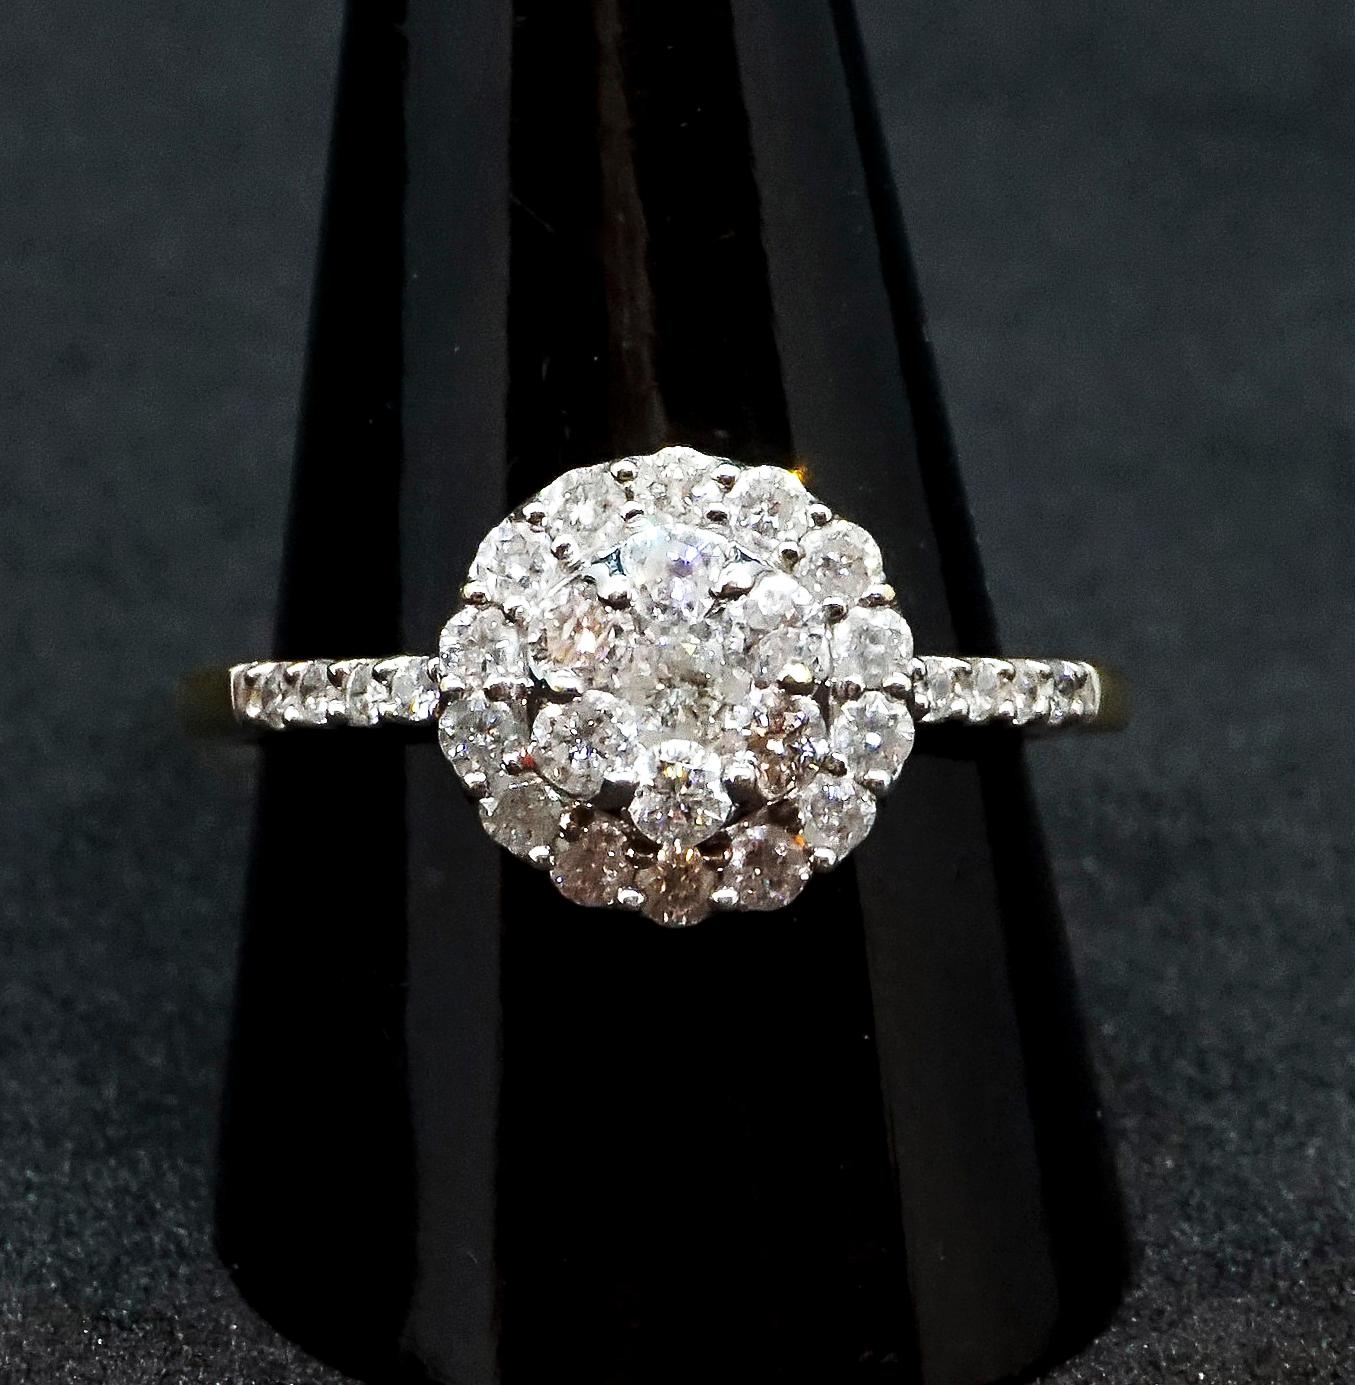 Antique flower-shaped old brilliant-cut diamond ring:
seven old brilliant-cut diamonds centered in a cluster, surounded by a halo of fourteen diamonds, another four diamonds in each of the shoulders, all diamonds estimated to weigh a total of 1.0